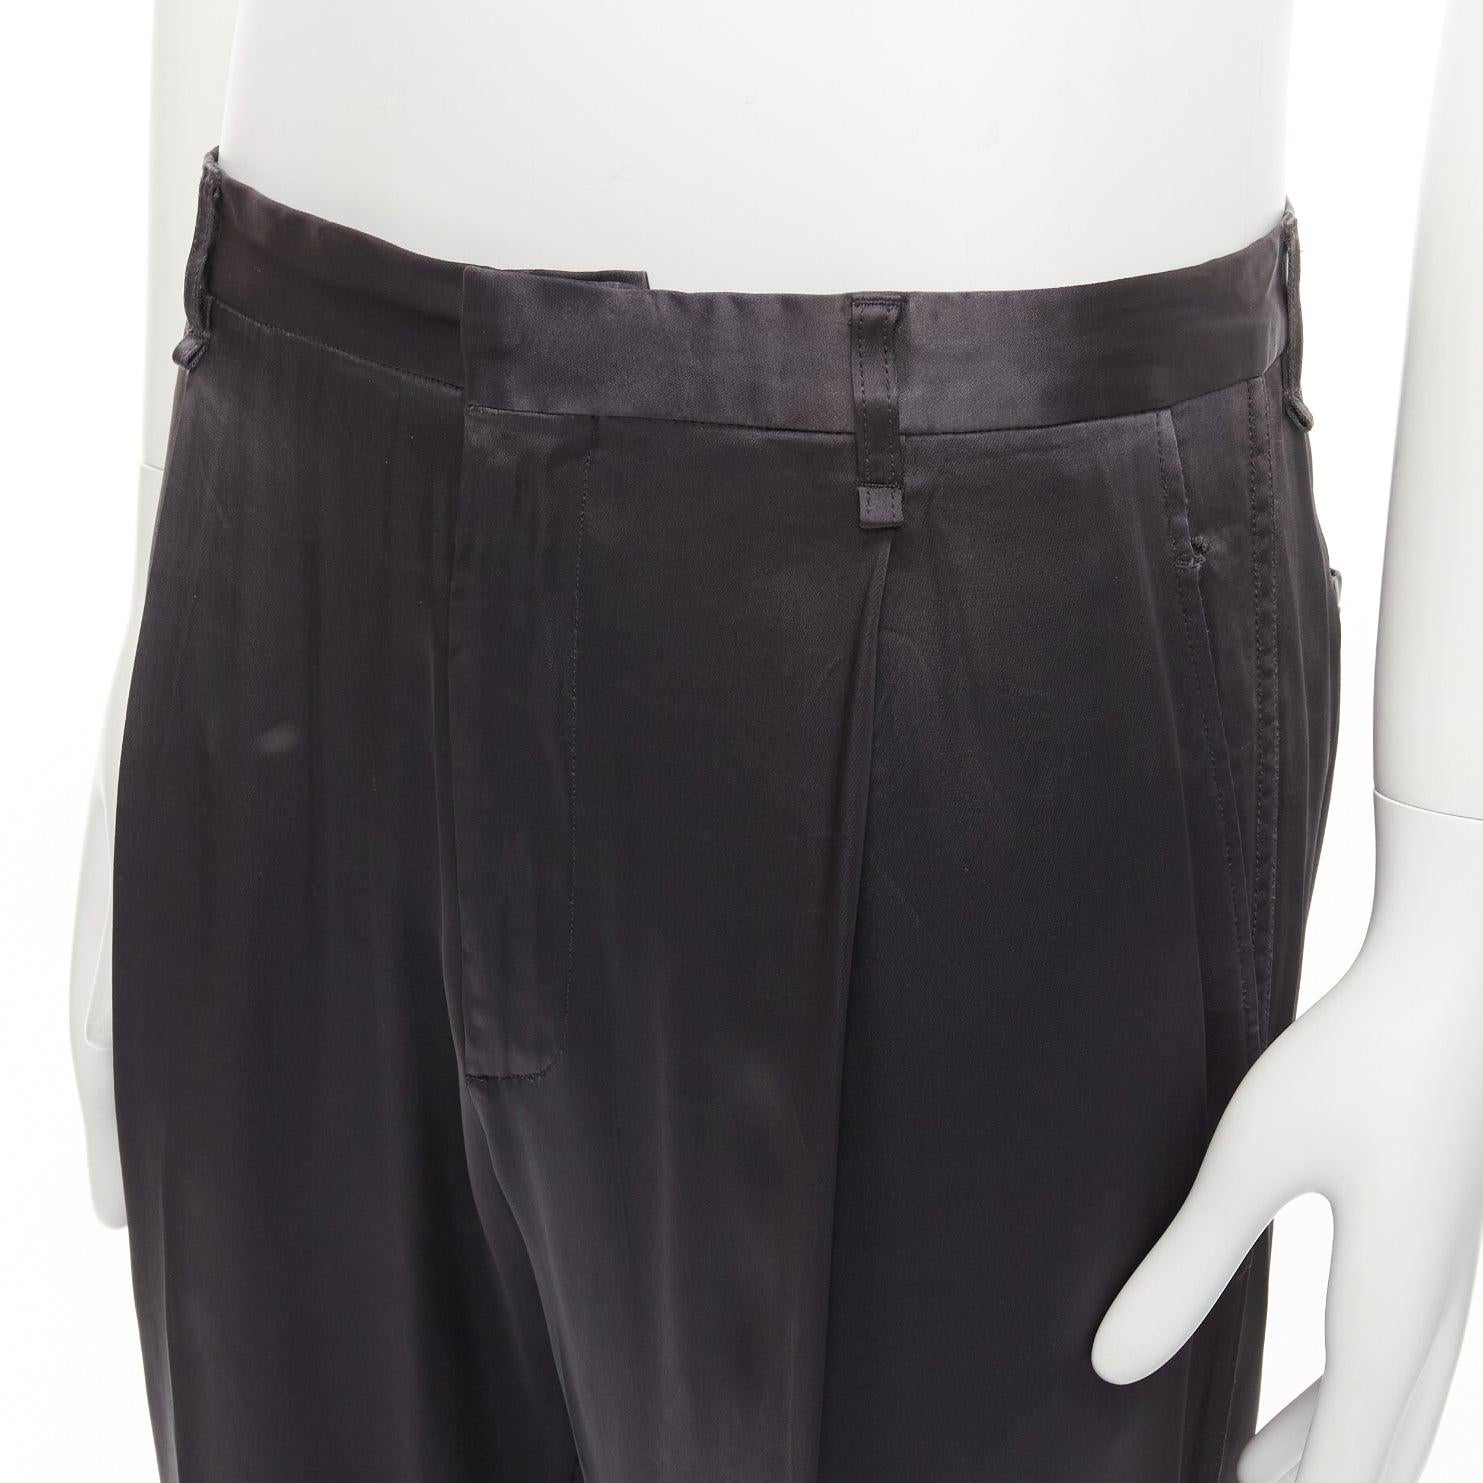 LANVIN grey acetate blend pleated front back pockets cuffed pants IT46 S
Reference: CNLE/A00280
Brand: Lanvin
Designer: Alber Elbaz
Material: Acetate, Blend
Color: Grey
Pattern: Solid
Closure: Zip Fly
Lining: Grey Fabric
Made in: